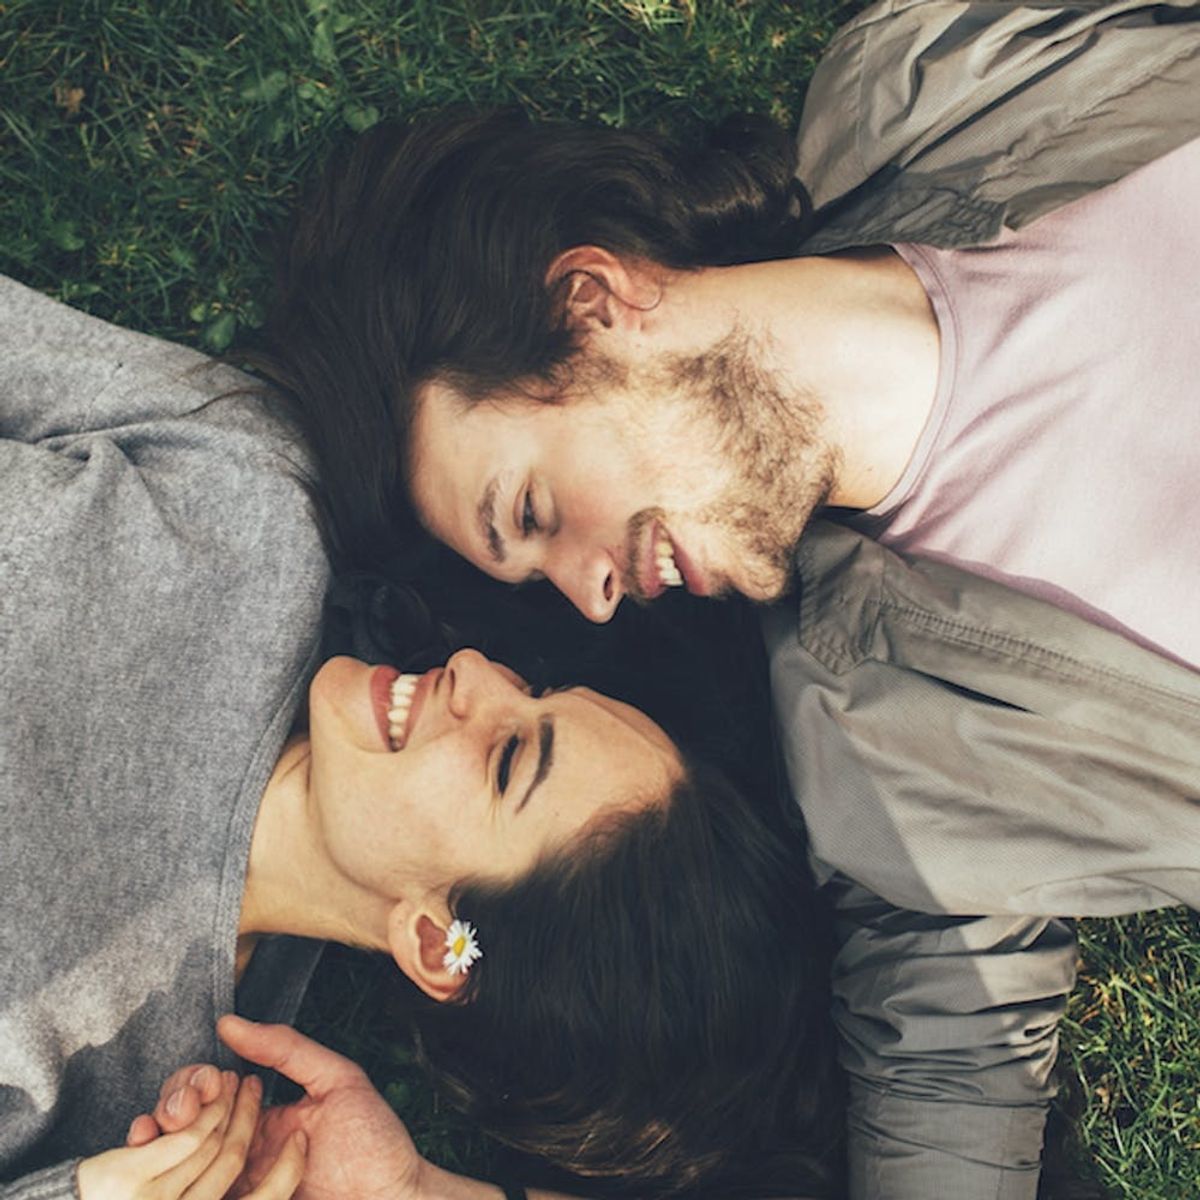 5 Questions That Will Tell You How Compatible You and Your Partner REALLY Are